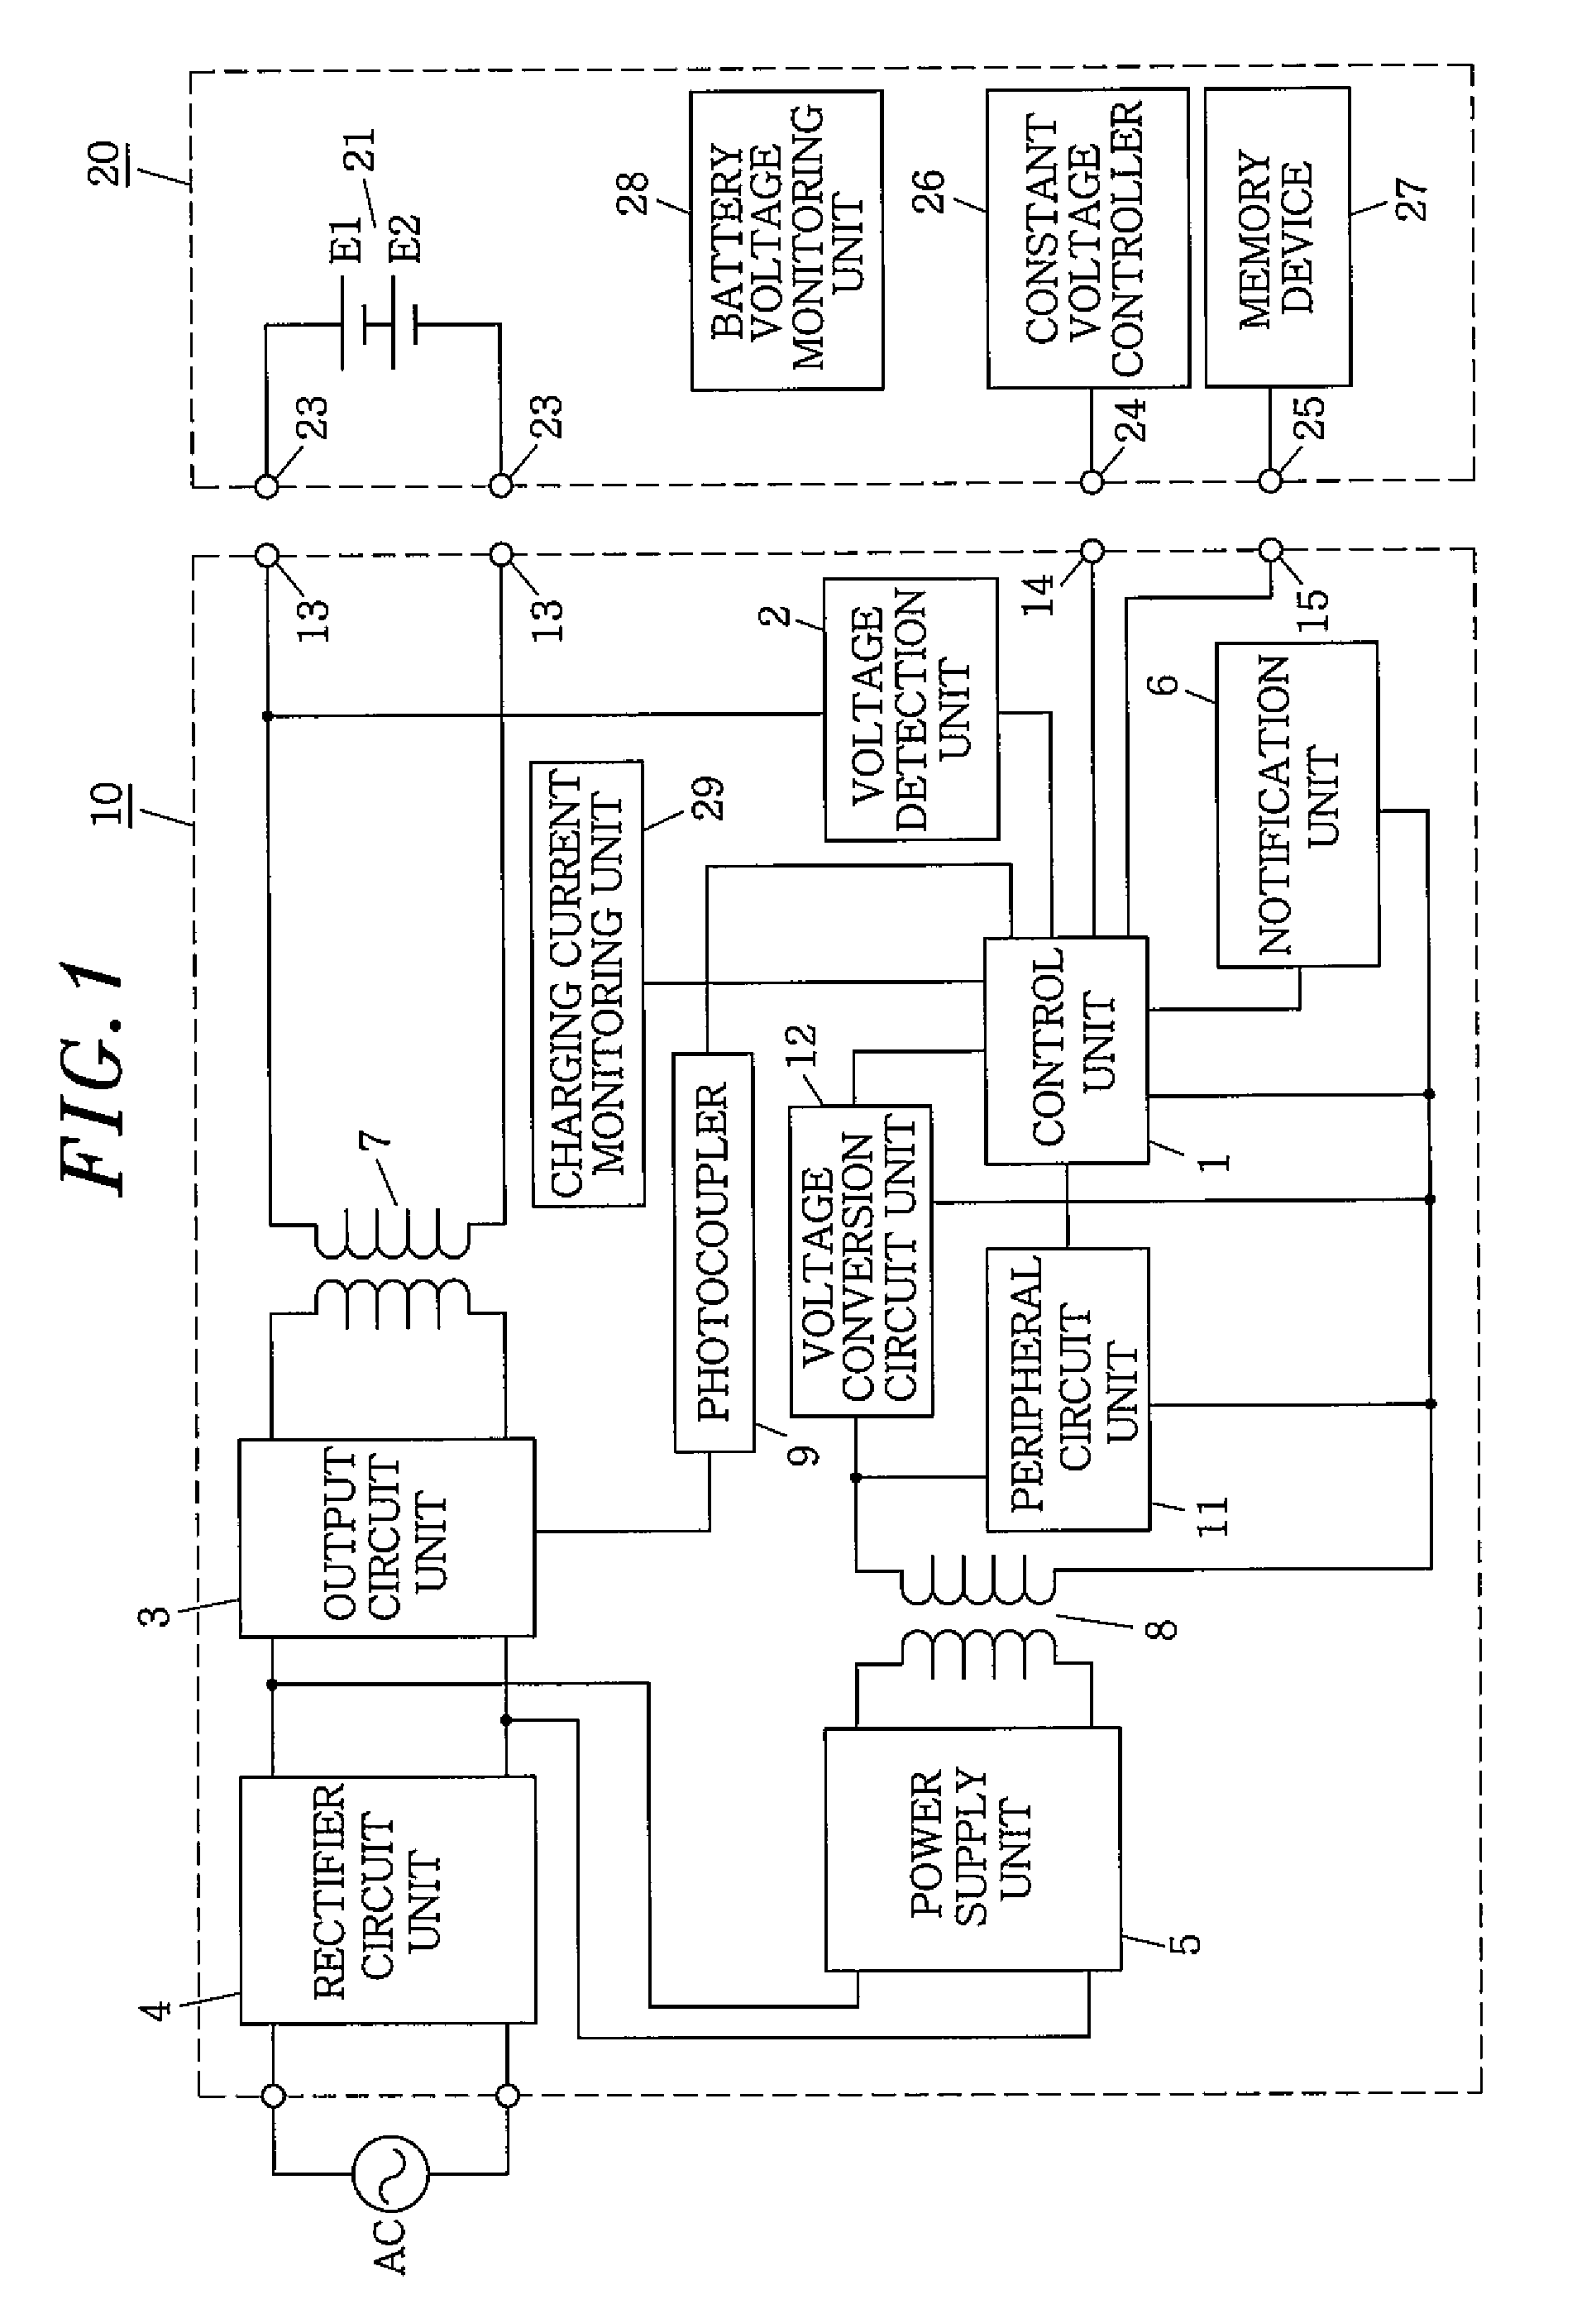 Charger apparatus capable of determining deterioration of second battery